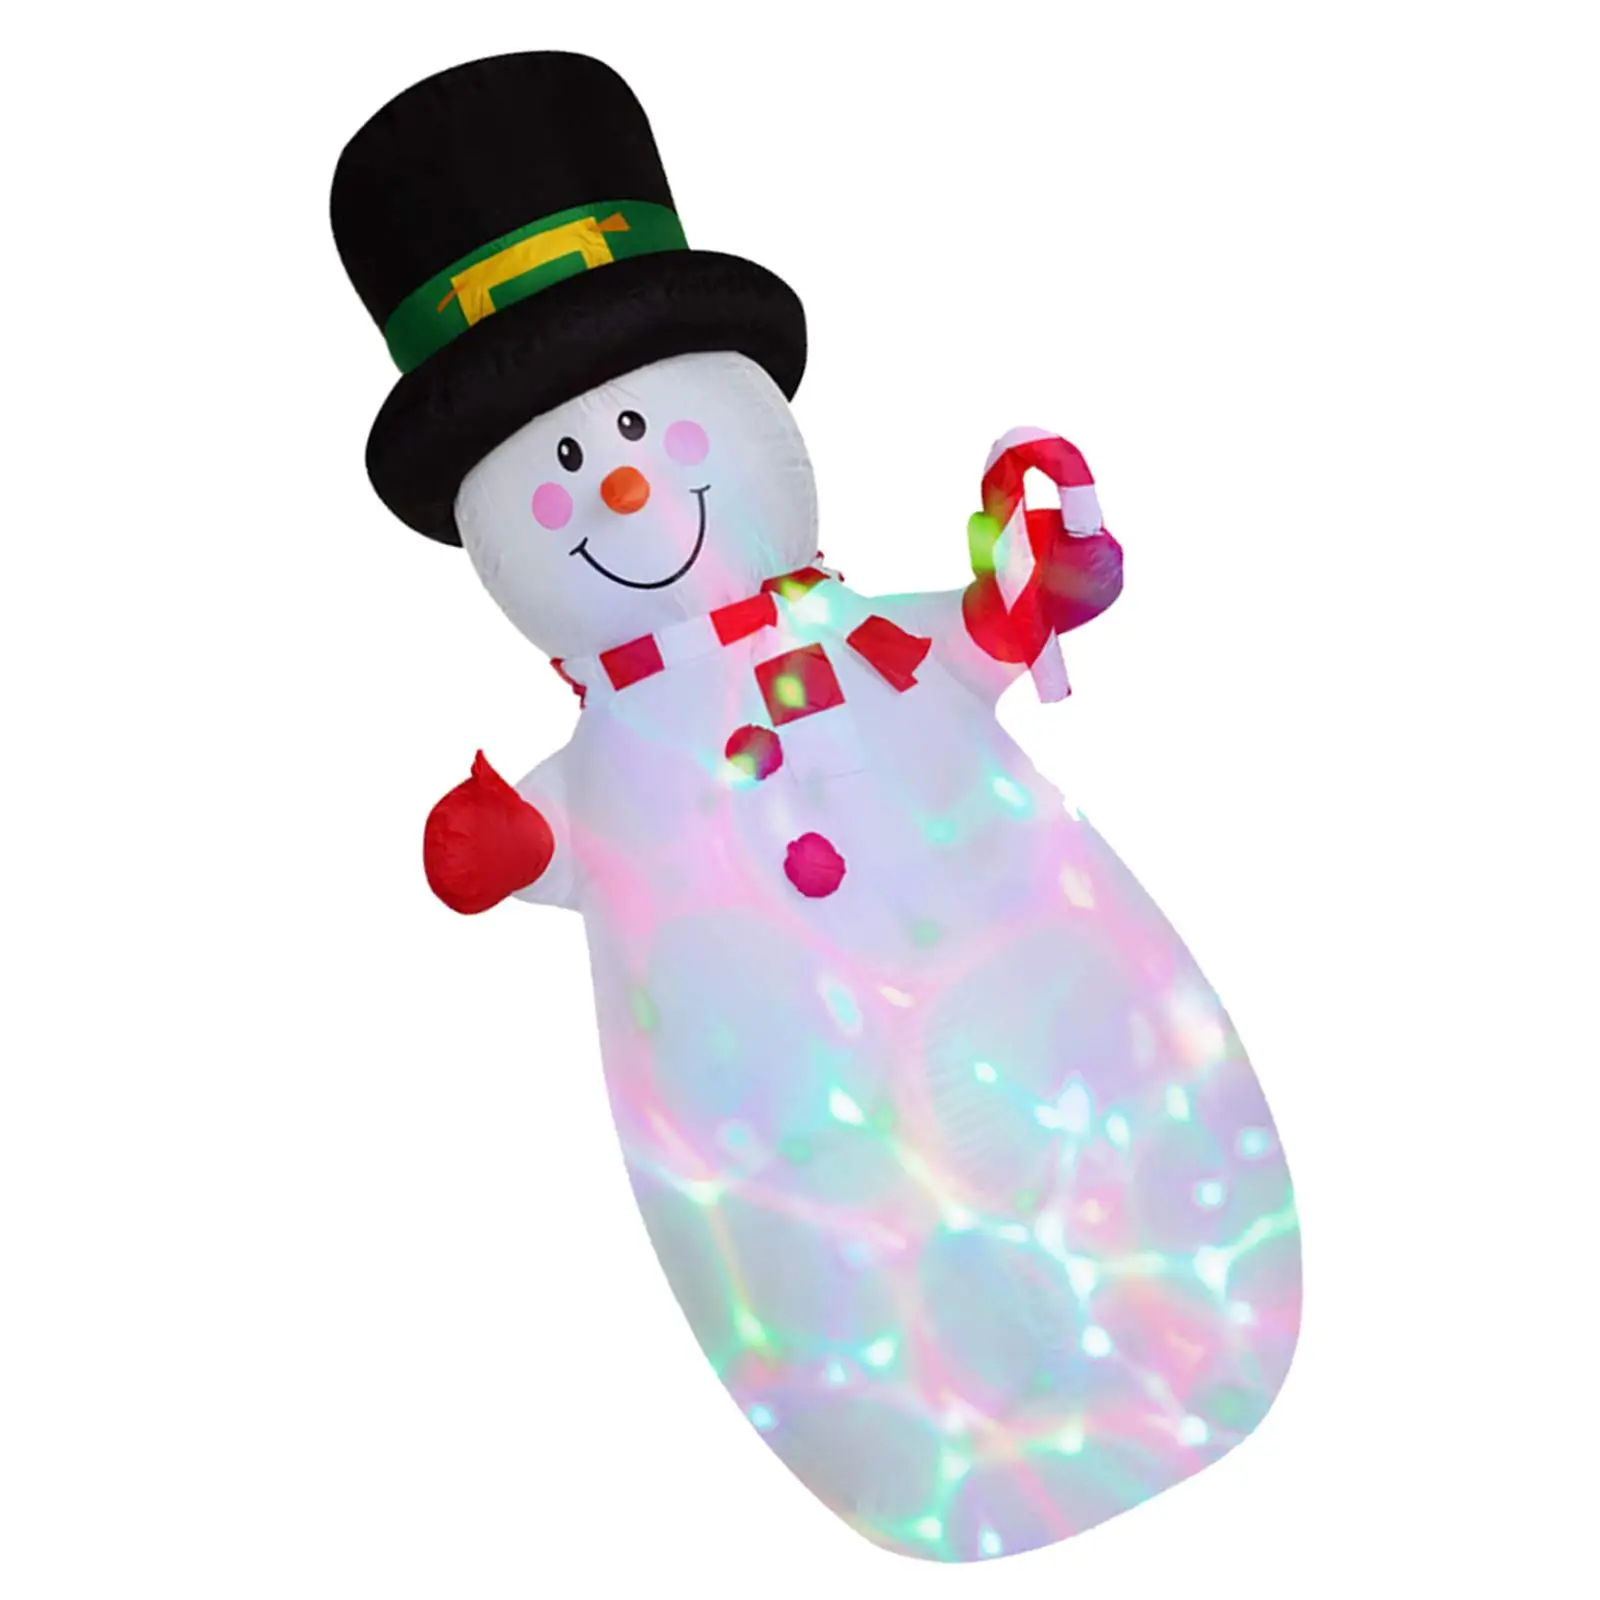 6 ft Christmas Inflatable Snowman with Rotating Light for Garden Yard